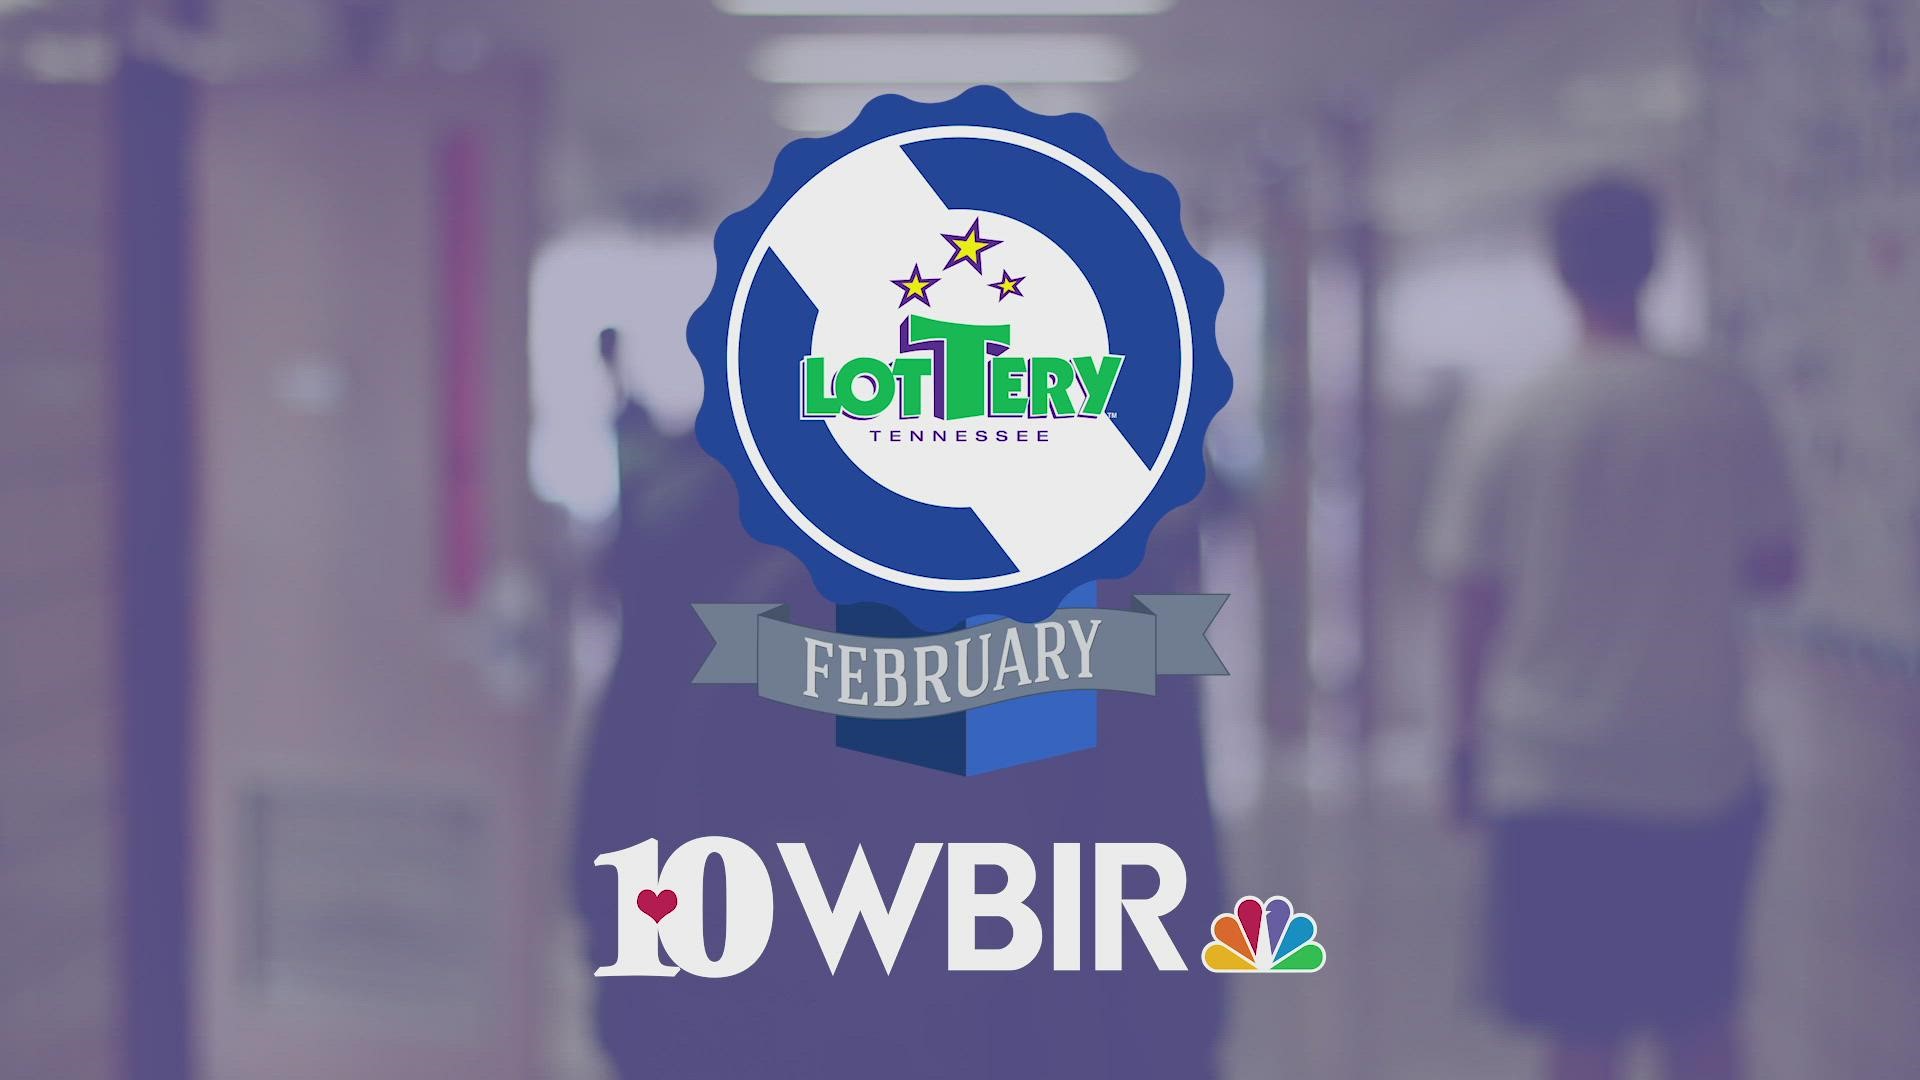 Channel 10, in partnership with the Tennessee Lottery, recognizes educators who are making a difference in our community.